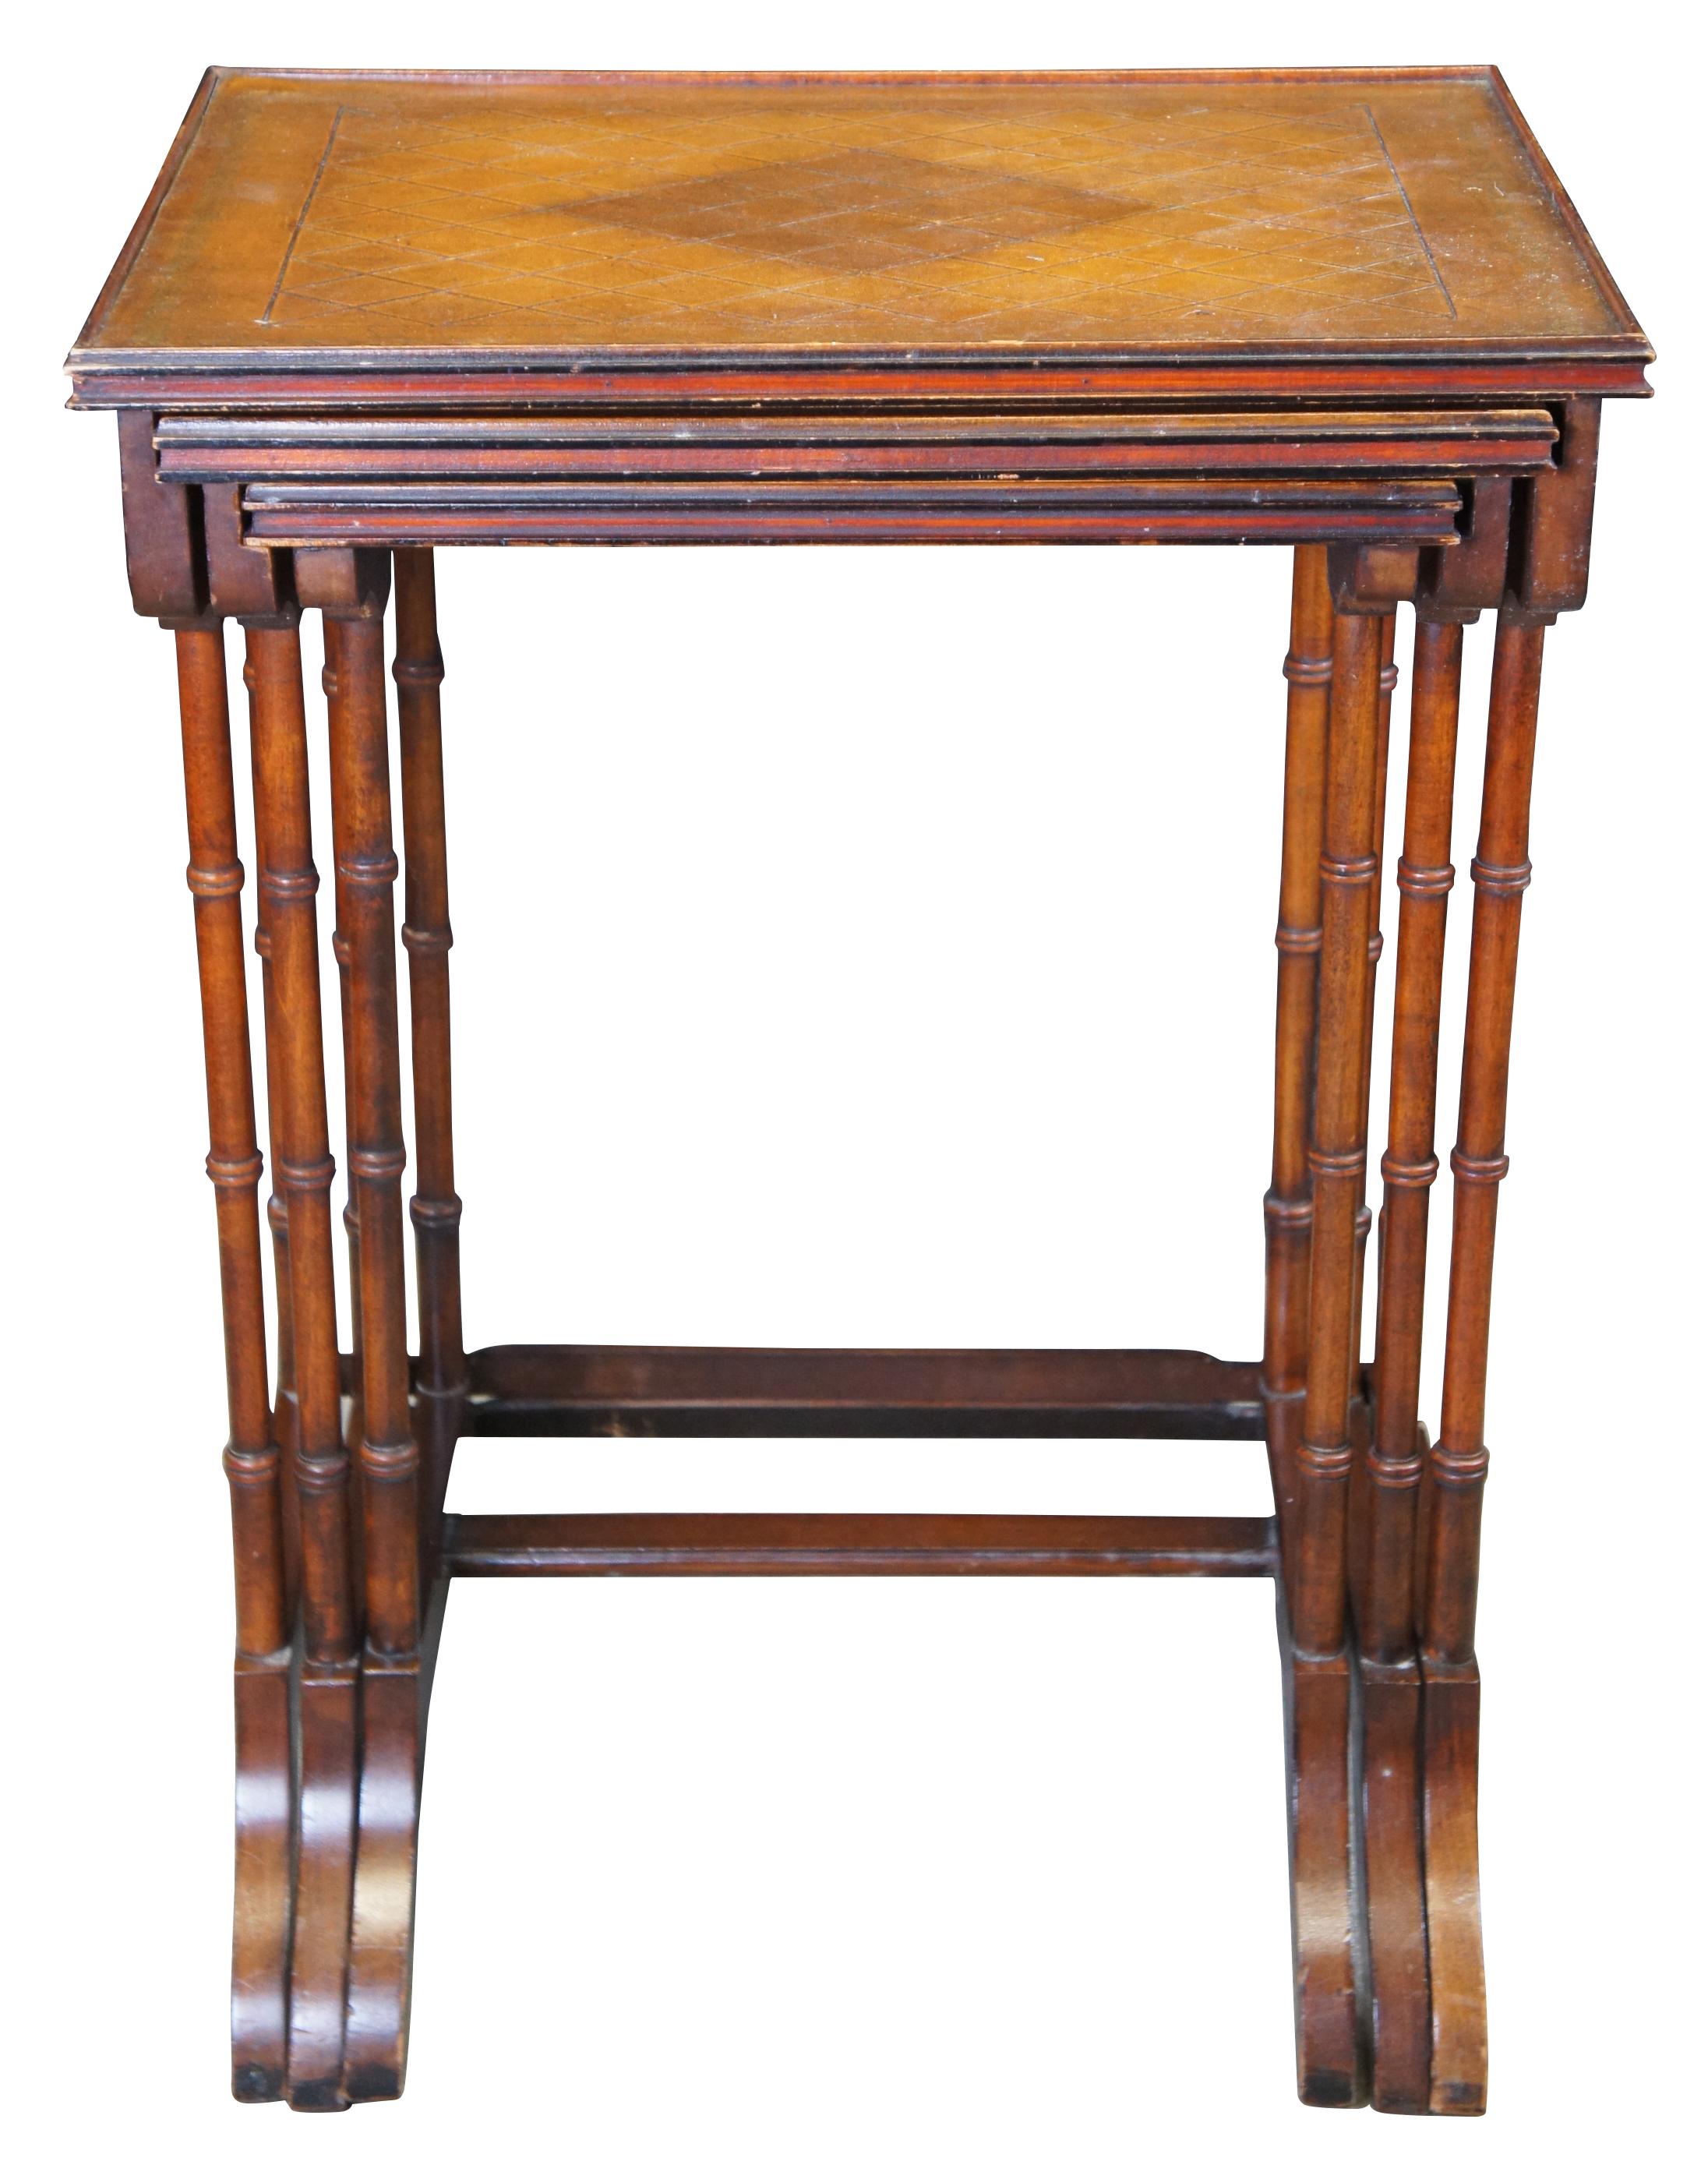 Nest of three mid-century Regency side or accent tables. Made of mahogany with tooled leather tops. Featuring a rectangular form diamond lattice pattern along largest table, bamboo style legs, and serpentine feet.

Measures: large - 18